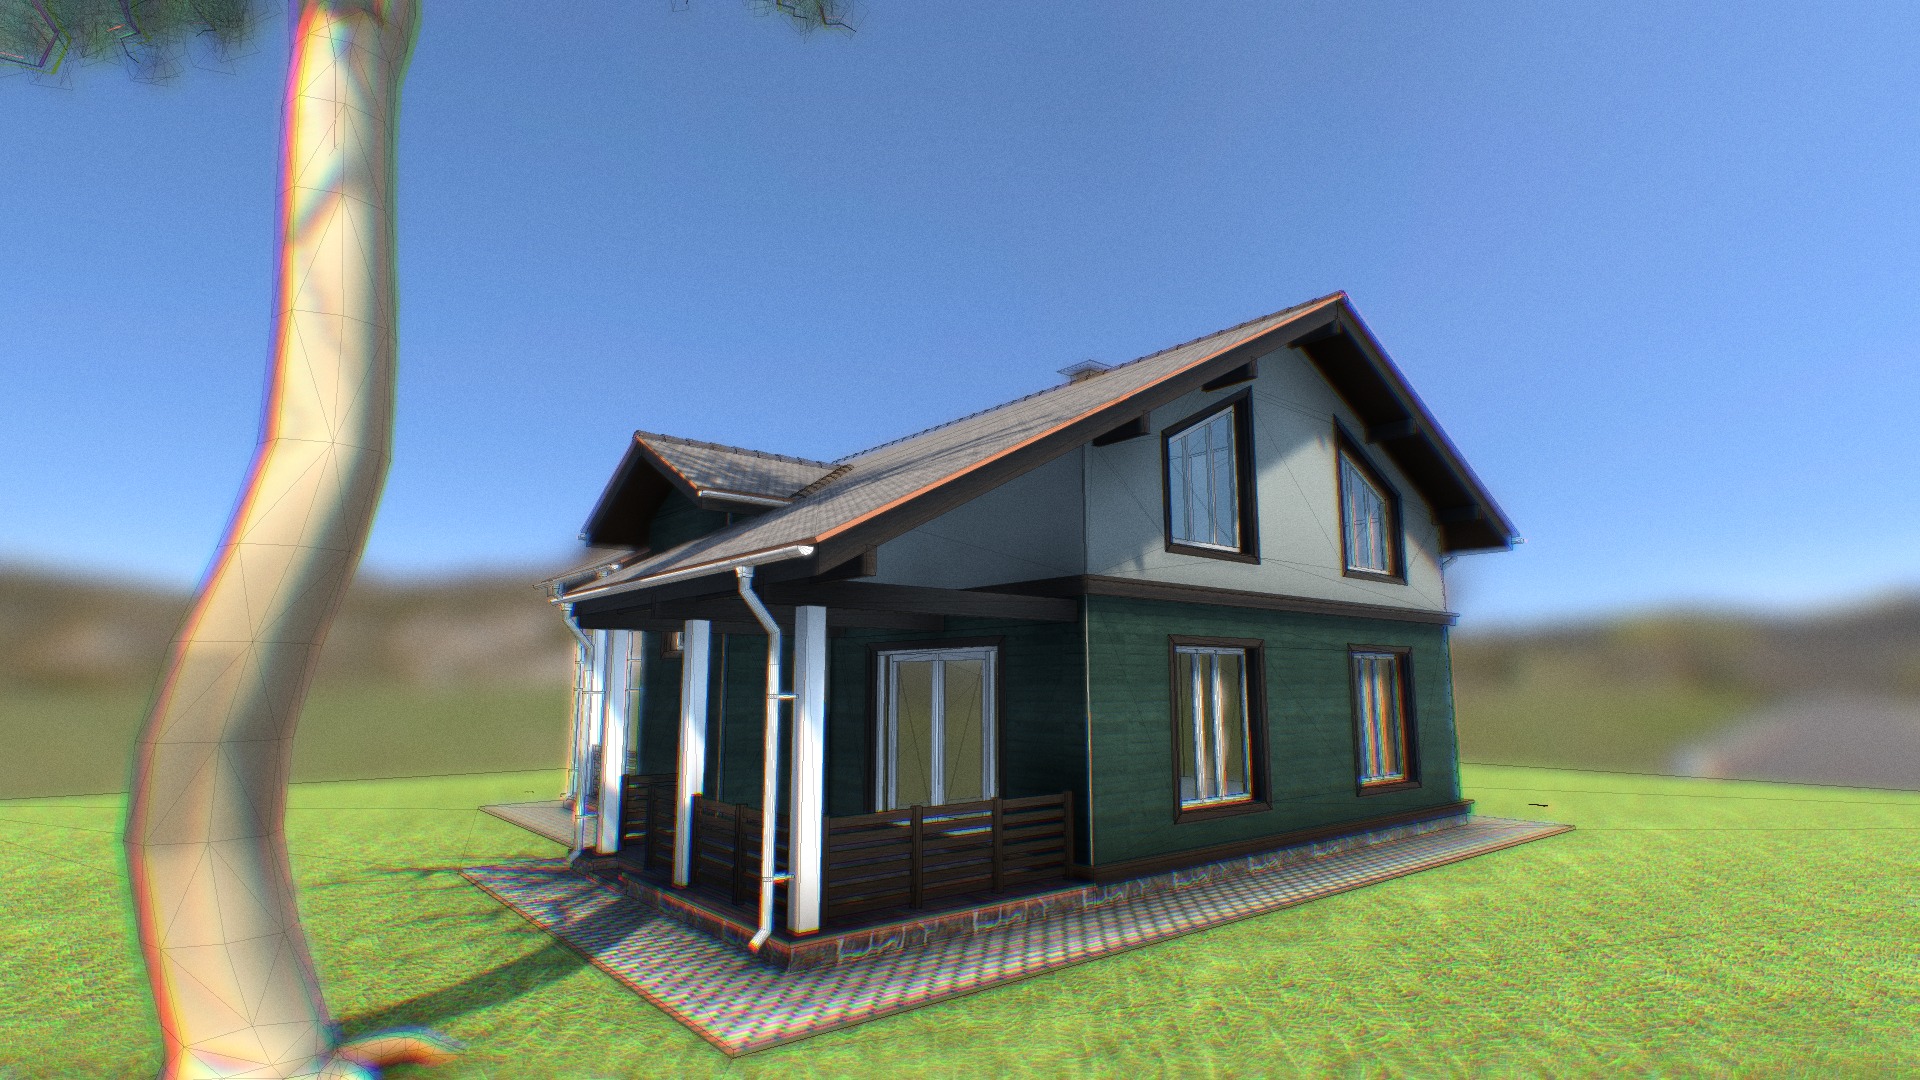 3D model P02/02-17 - This is a 3D model of the P02/02-17. The 3D model is about a house with a slide in the front.